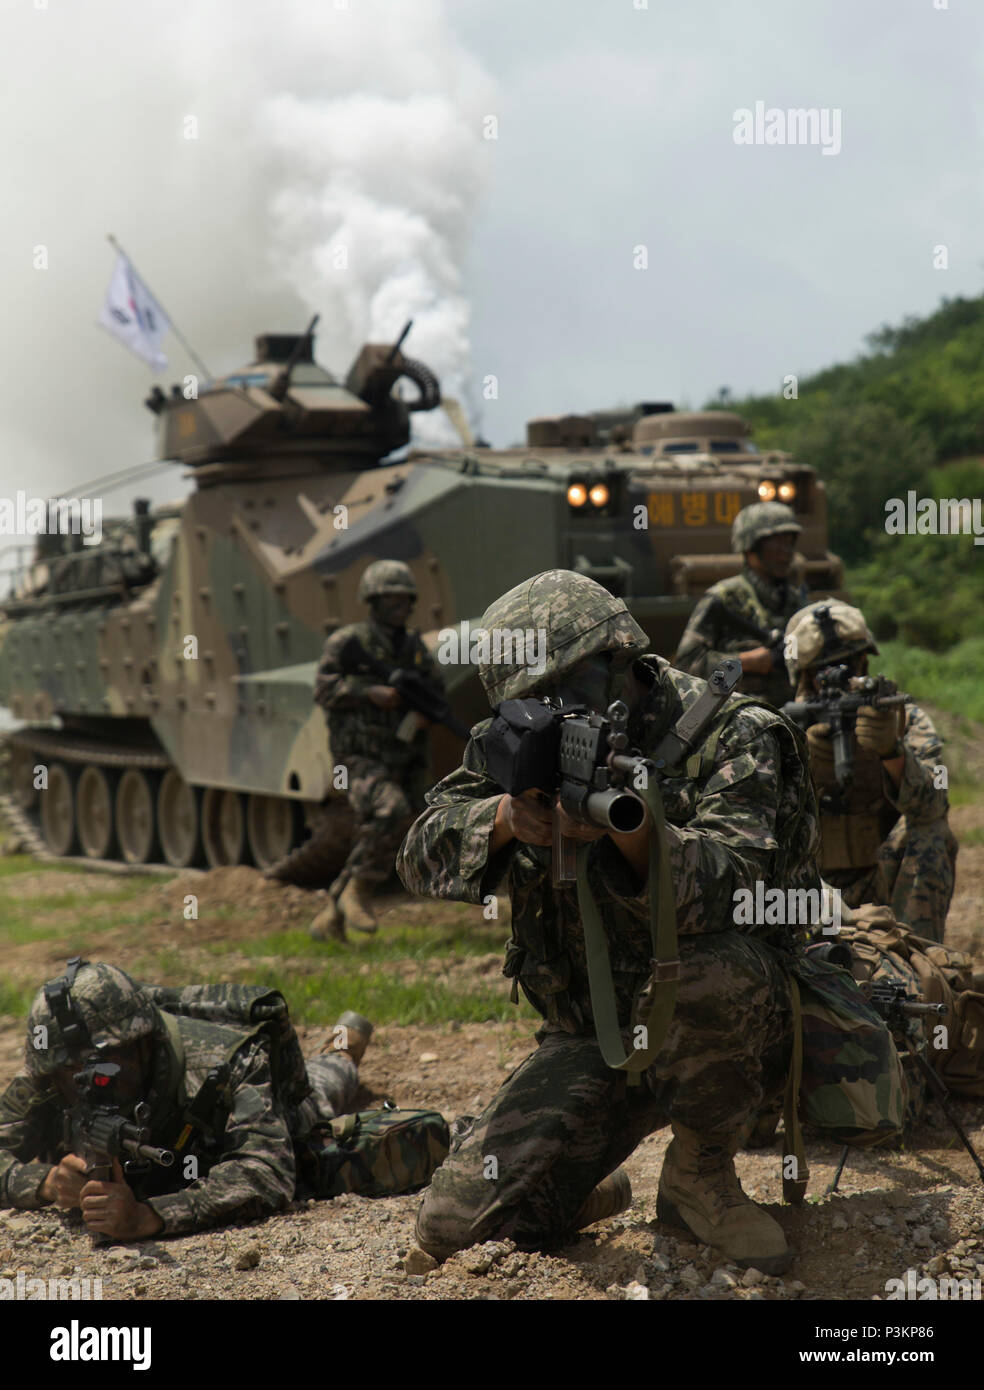 A Republic of Korea Marine sights in alongside U.S. Marines as ROK Assault Amphibious Vehicles shoot off smoke behind them July 6, 2016 at Suseong Range, South Korea, during a Korean Marine Exchange Program. The goal of the KMEP is to sustain the combined force and enhance the ROK-U.S. team at the tactical level to build combined war fighting capabilities. During this exercise, the Marines carried out a bilateral regimental-sized Marine Air Ground Task Force operation for the first time. The ROK Marines were a part of 73rd Battalion, 7th Regiment, 1st Marine Division. The U.S. service members  Stock Photo